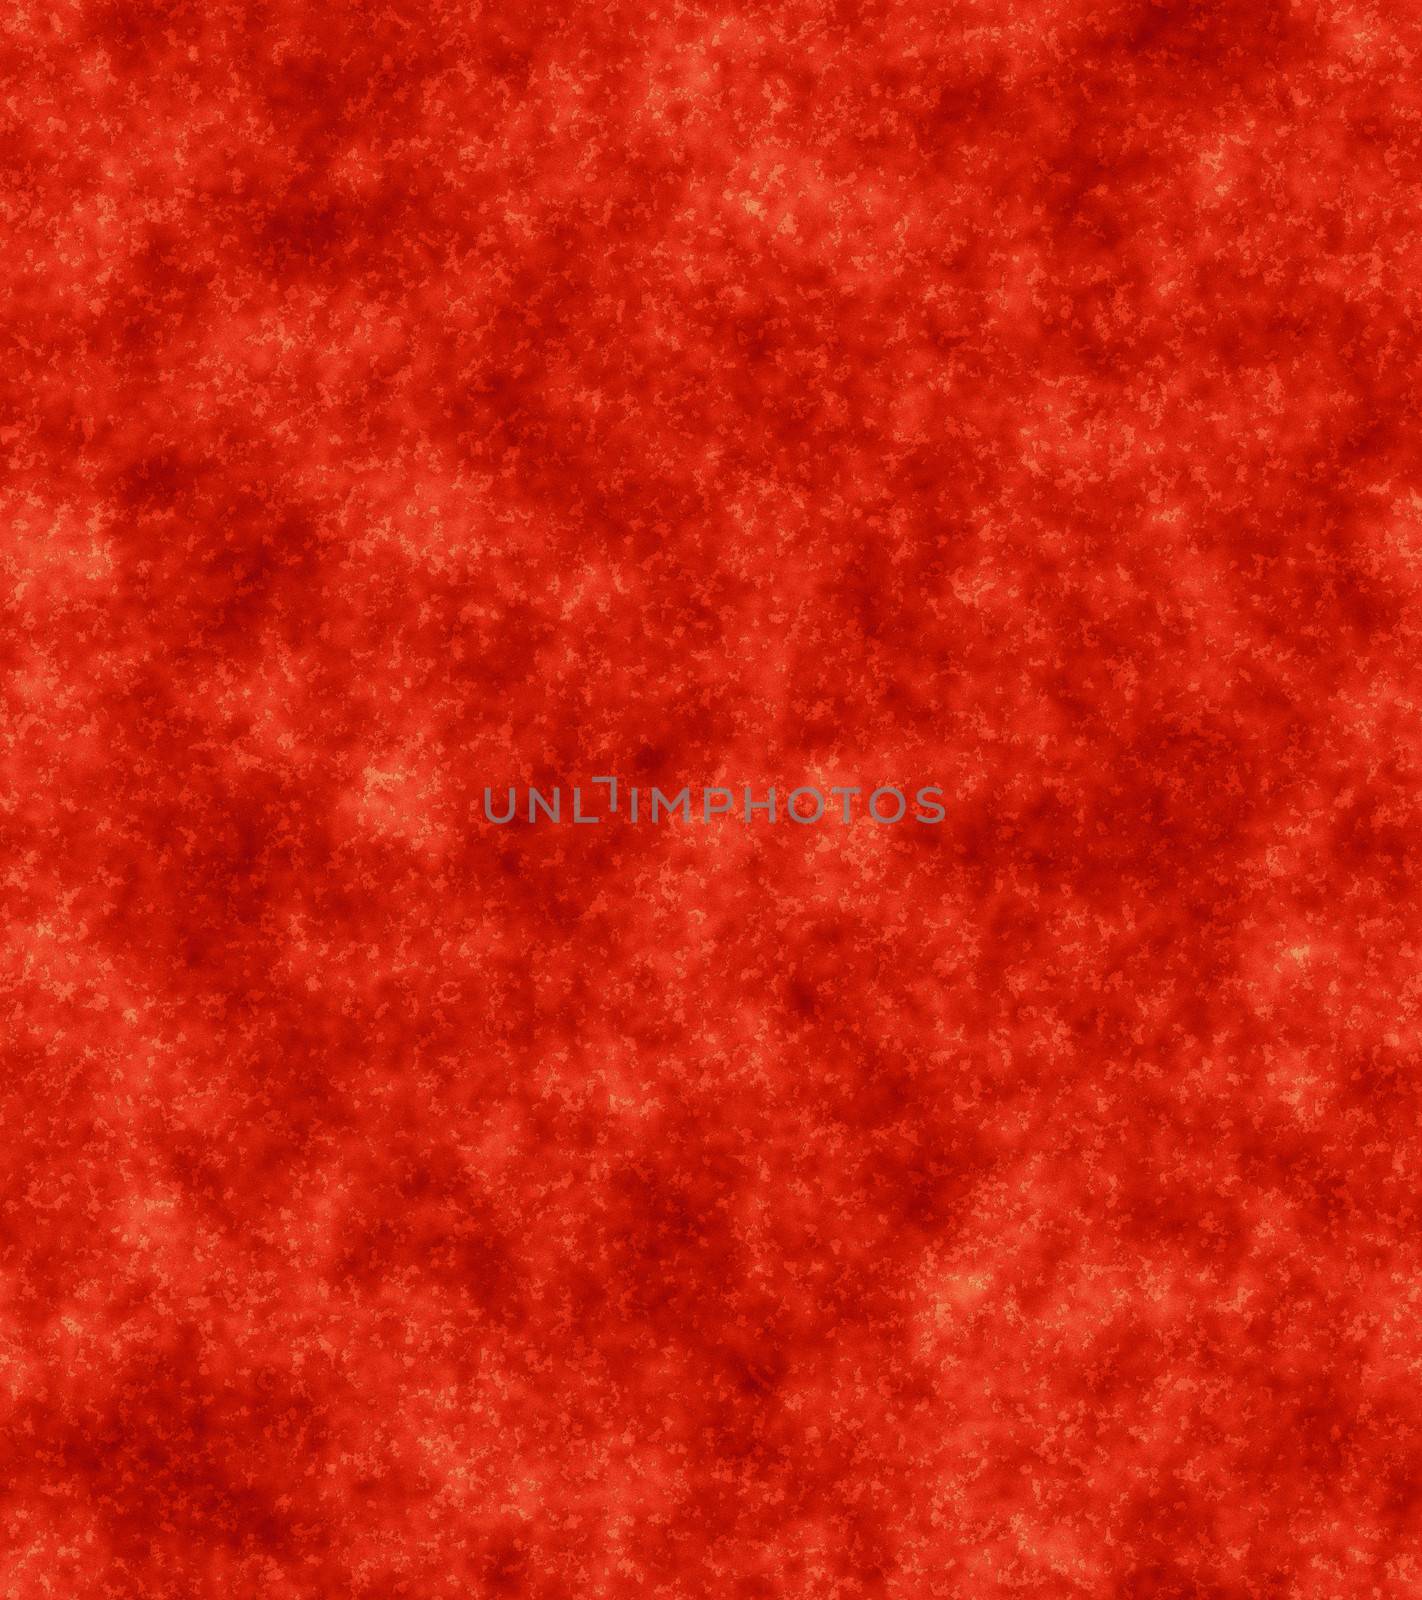 old, grunge background texture in red by sfinks